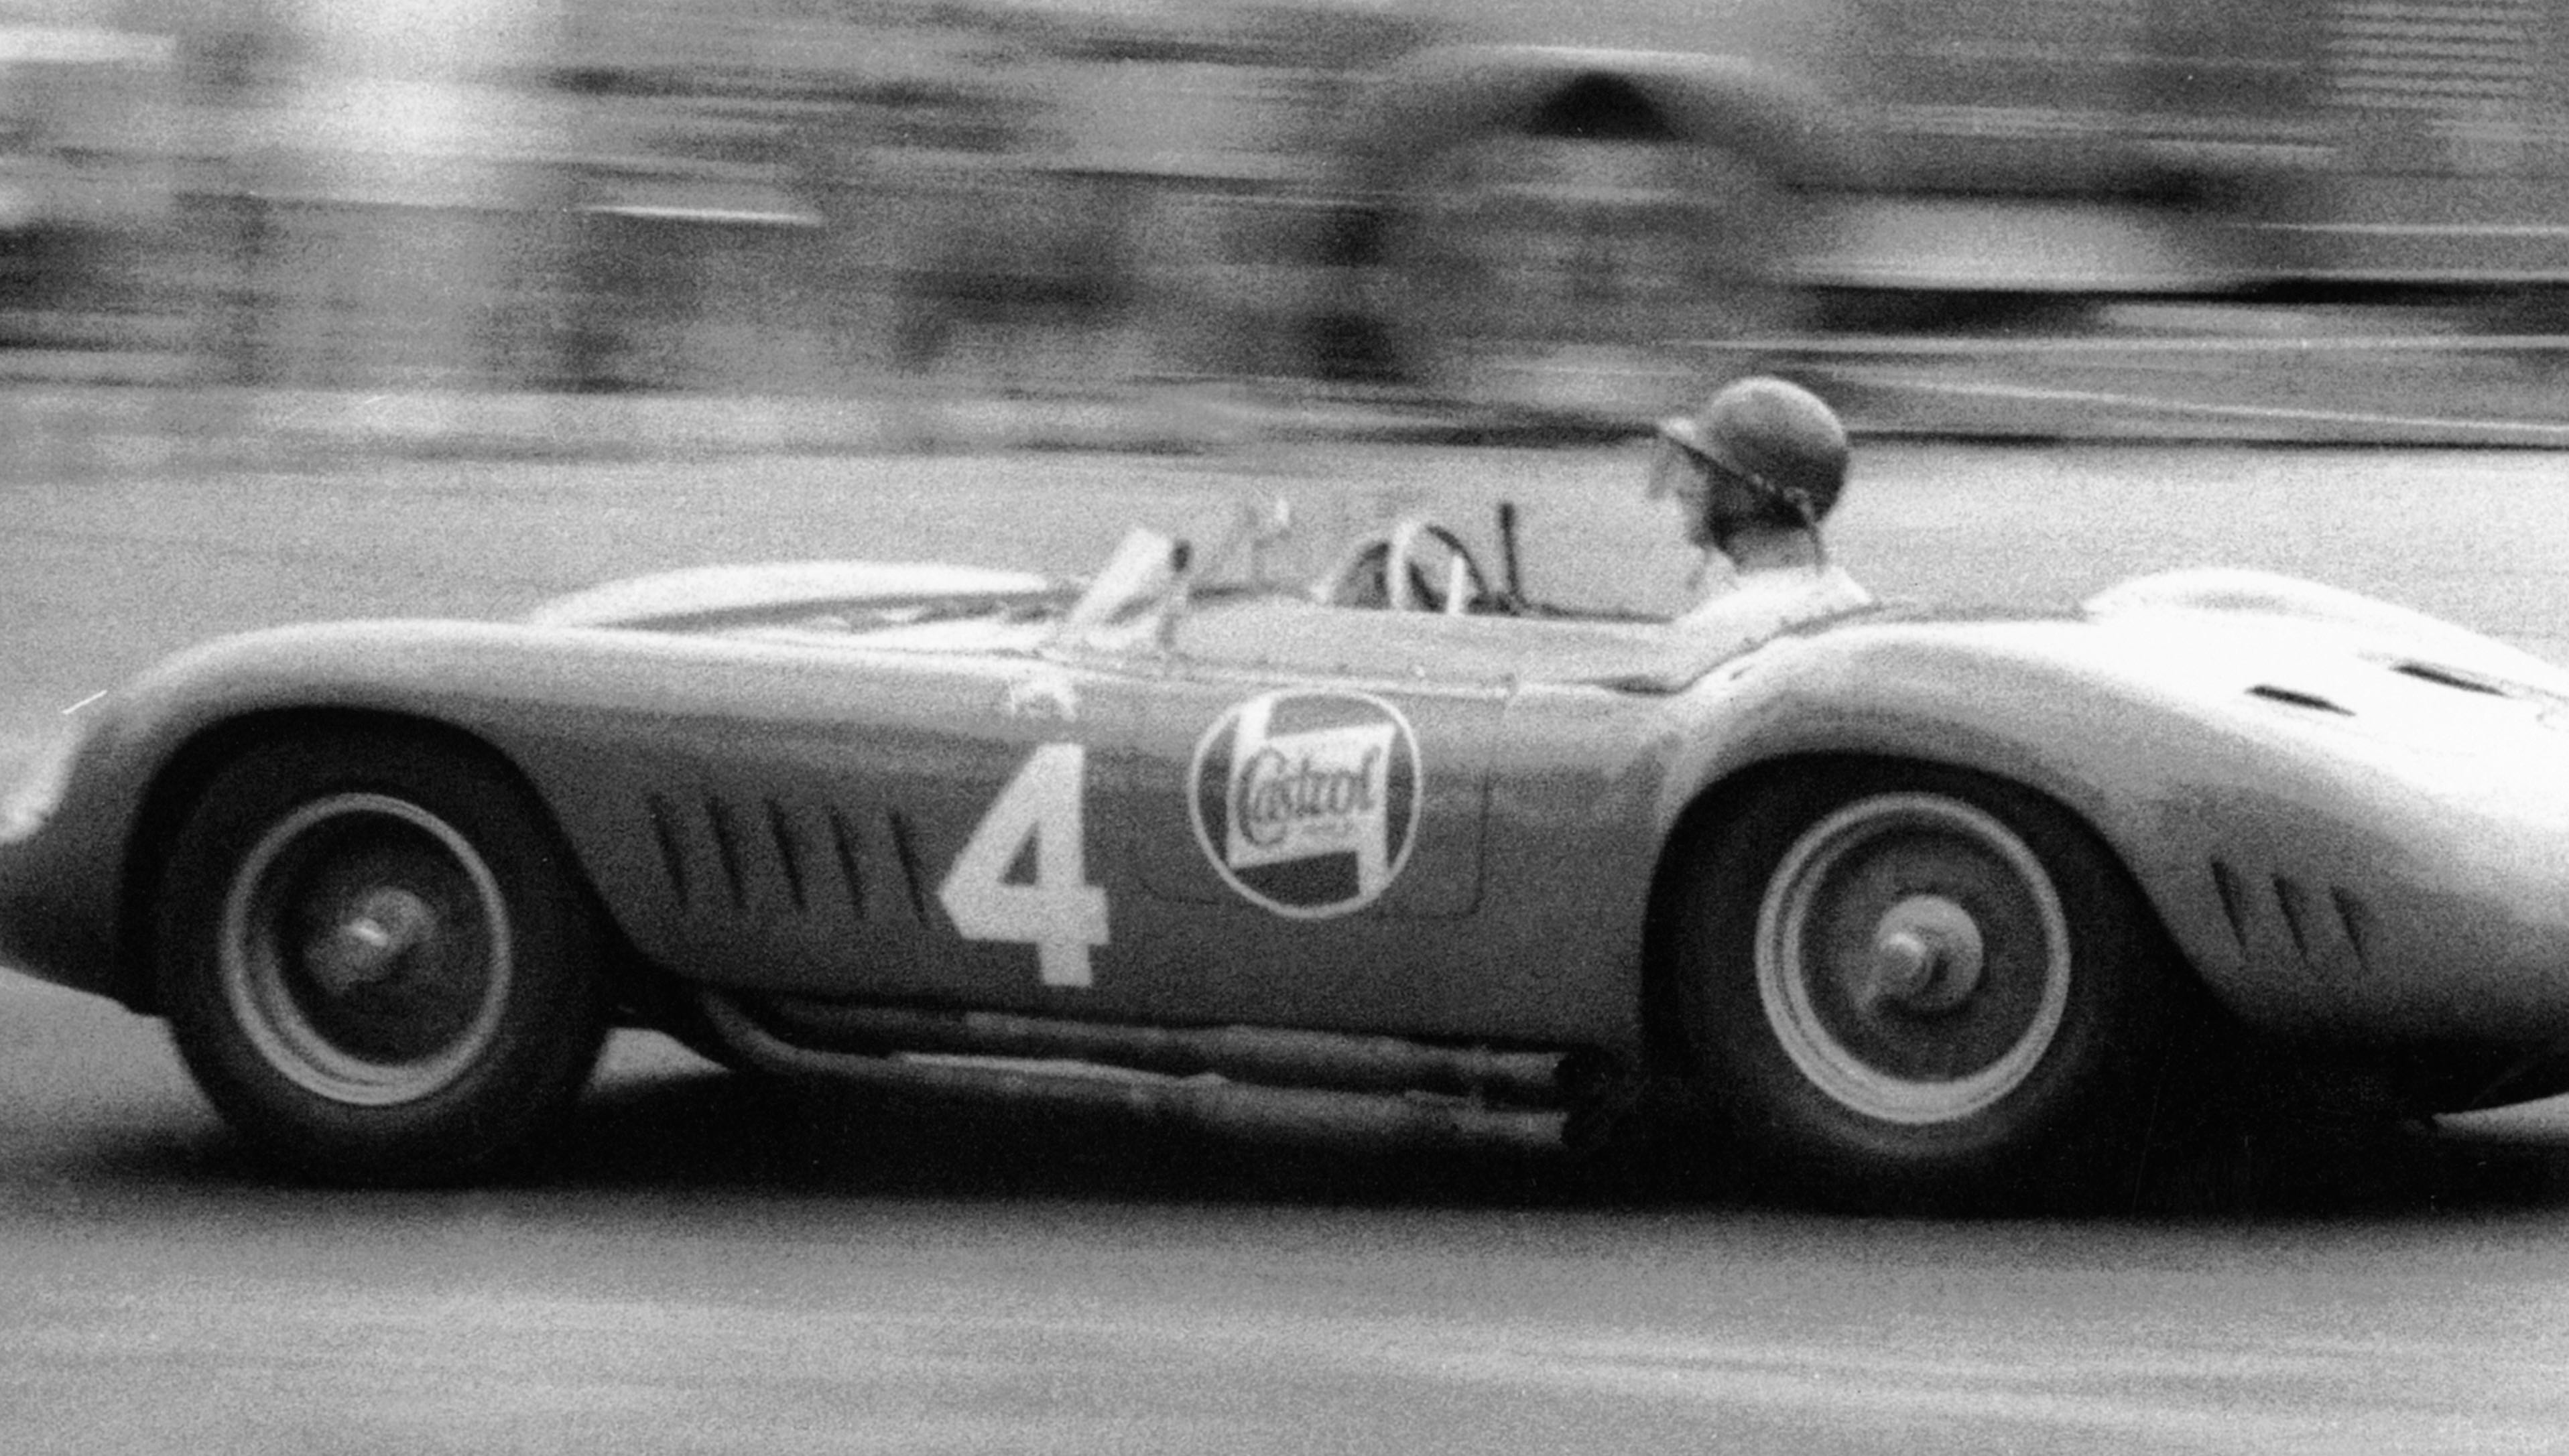 Fangio in the car during the 1956 racing season